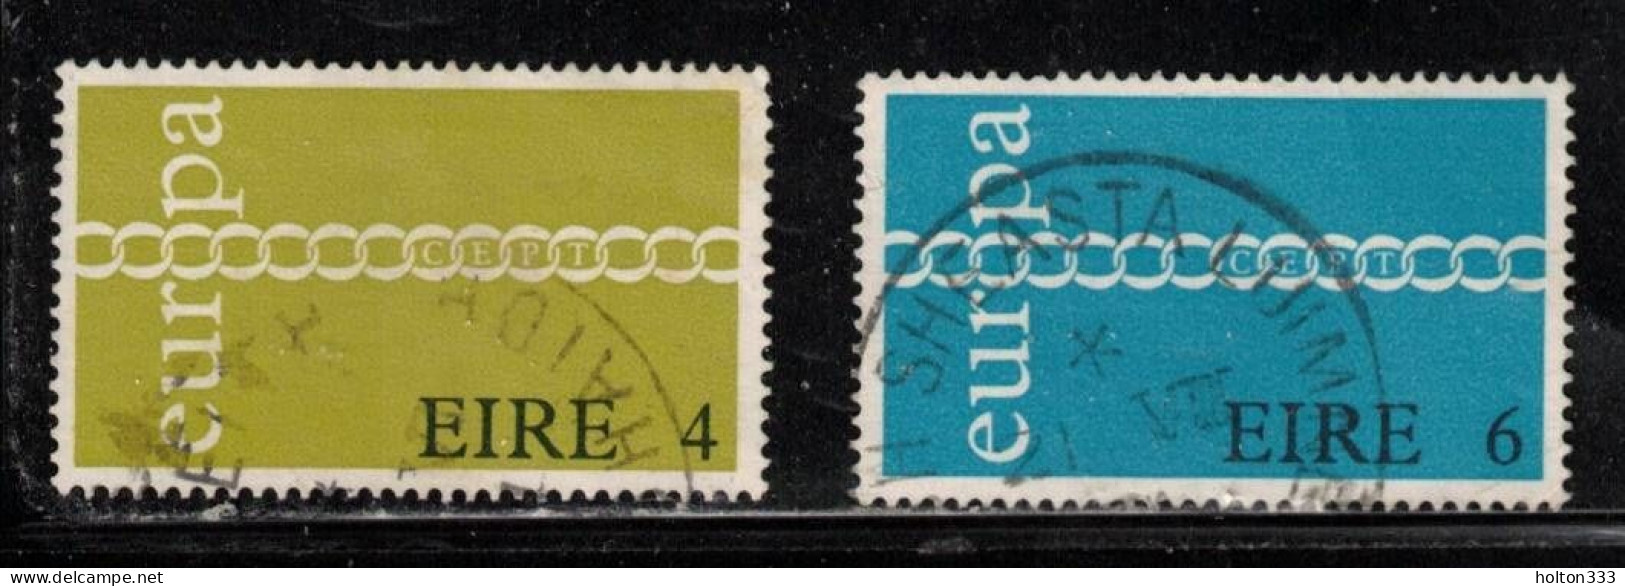 IRELAND Scott # 305-6 Used - 1971 Europa Issue - Used Stamps